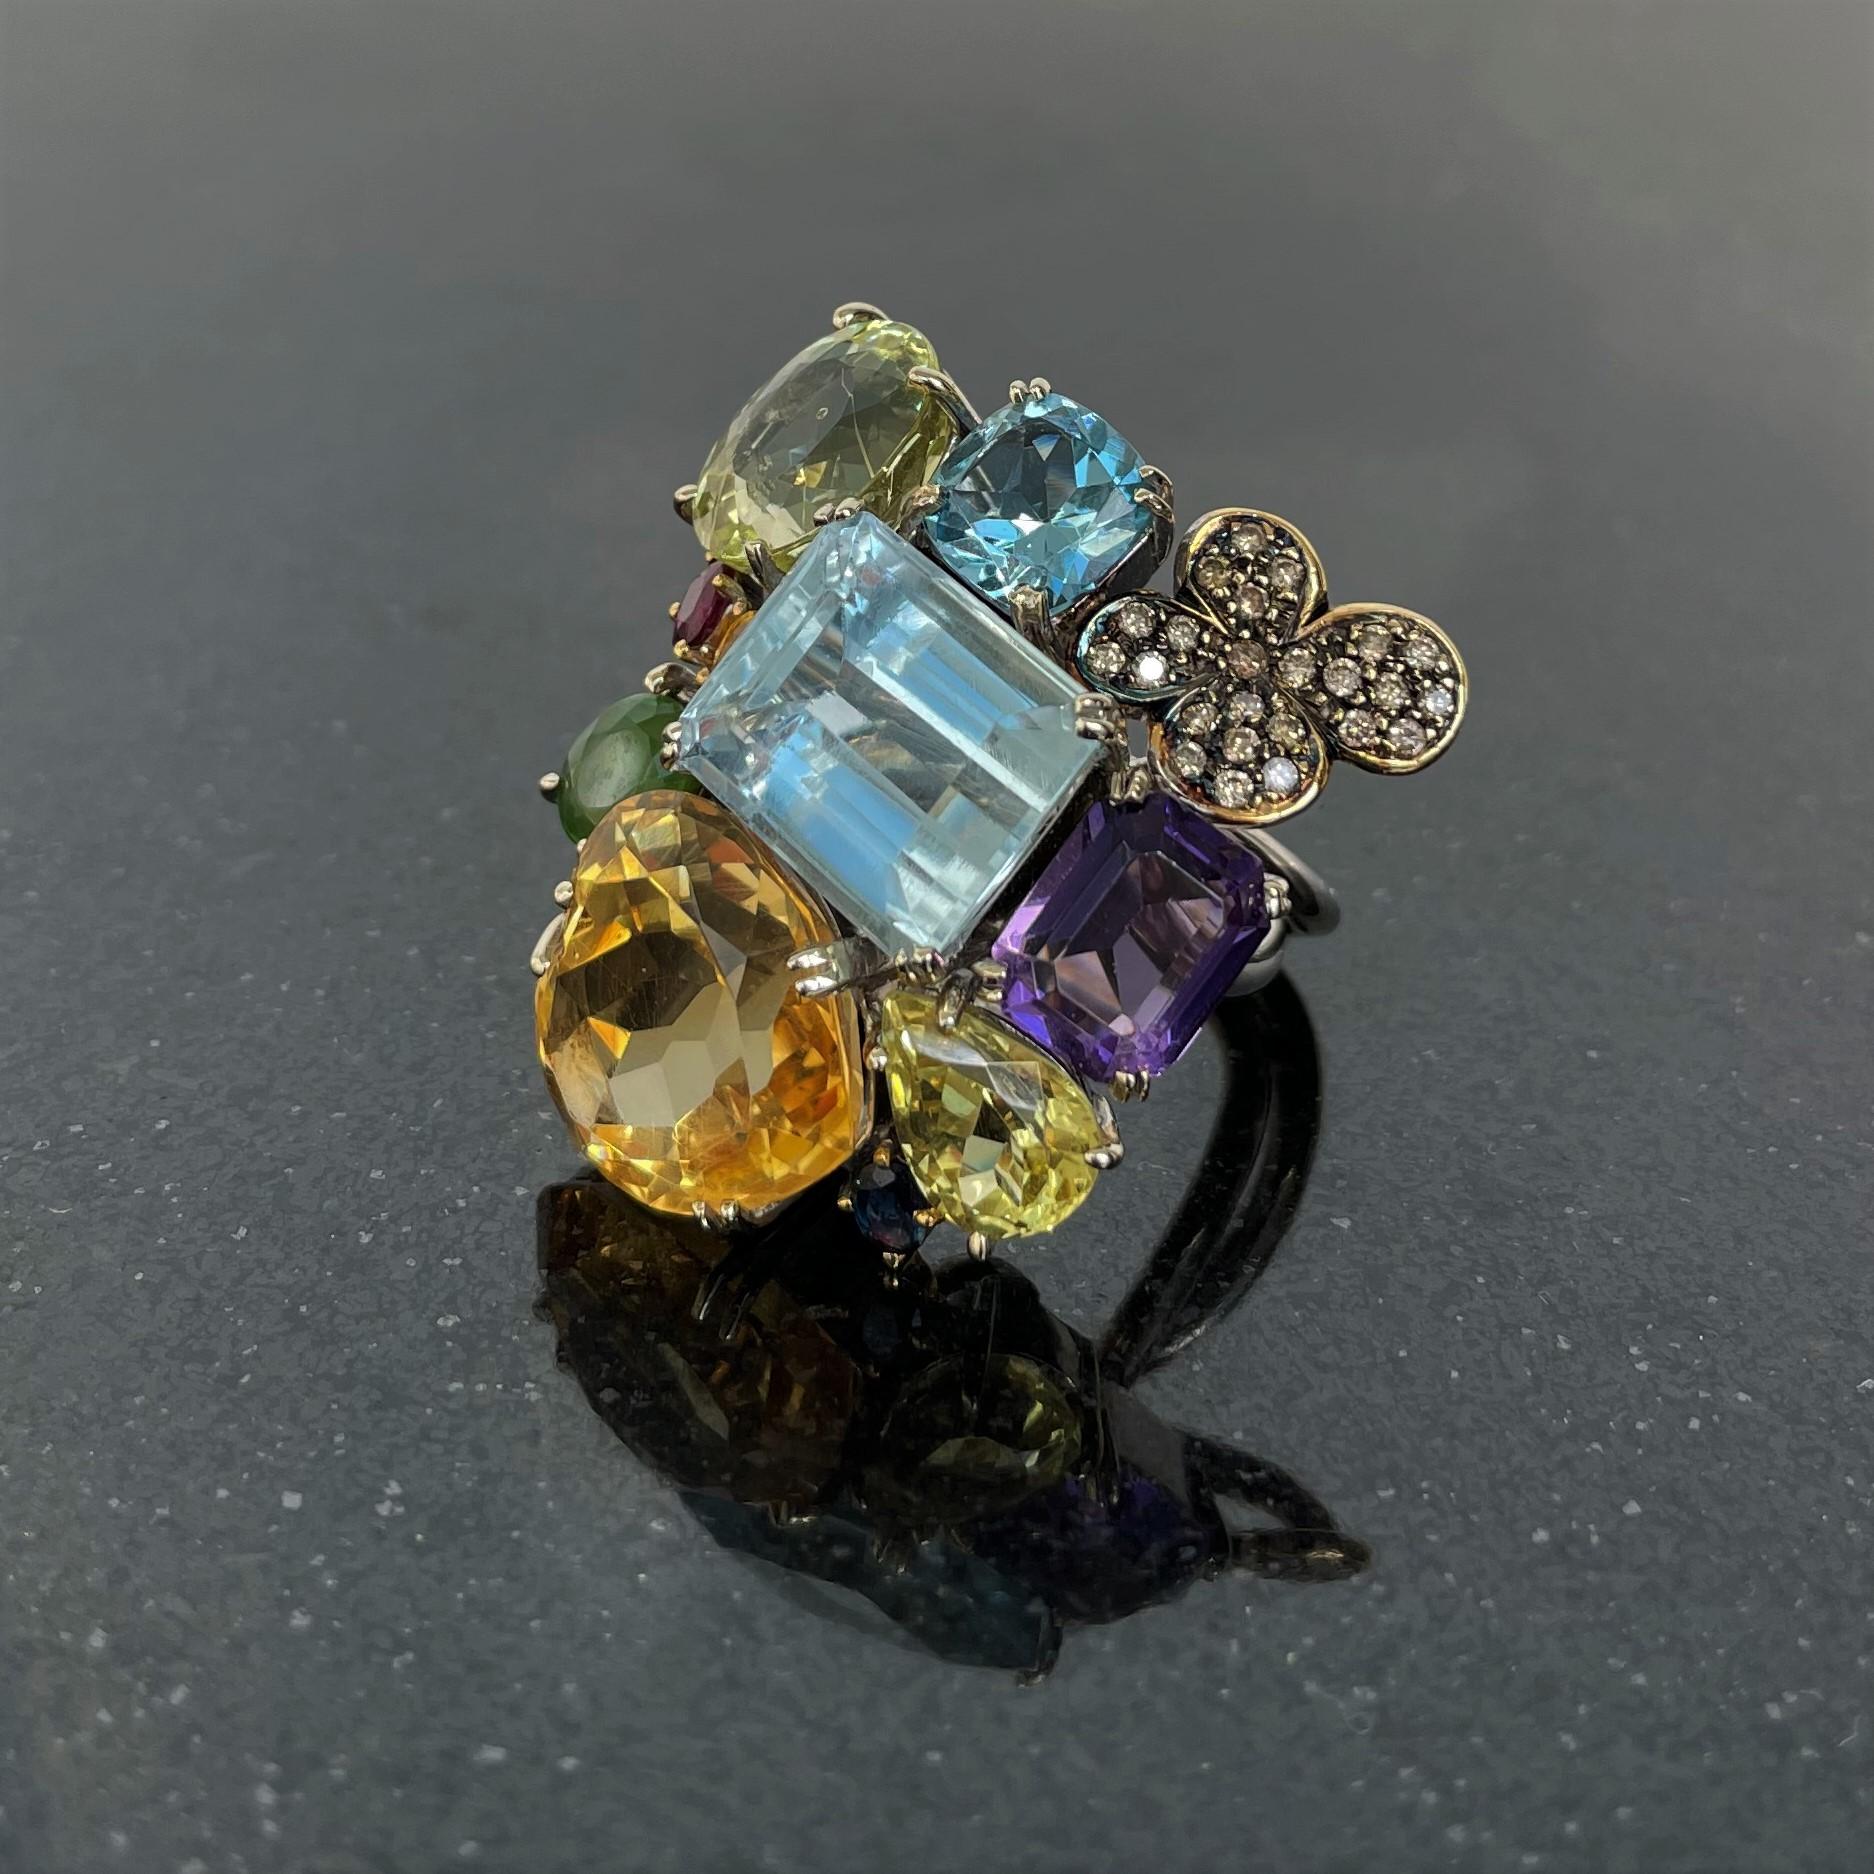 Contemporary Rosior one-off Aquamarine, Sapphire, Amethyst, Topaz and Diamond Cocktail Ring 